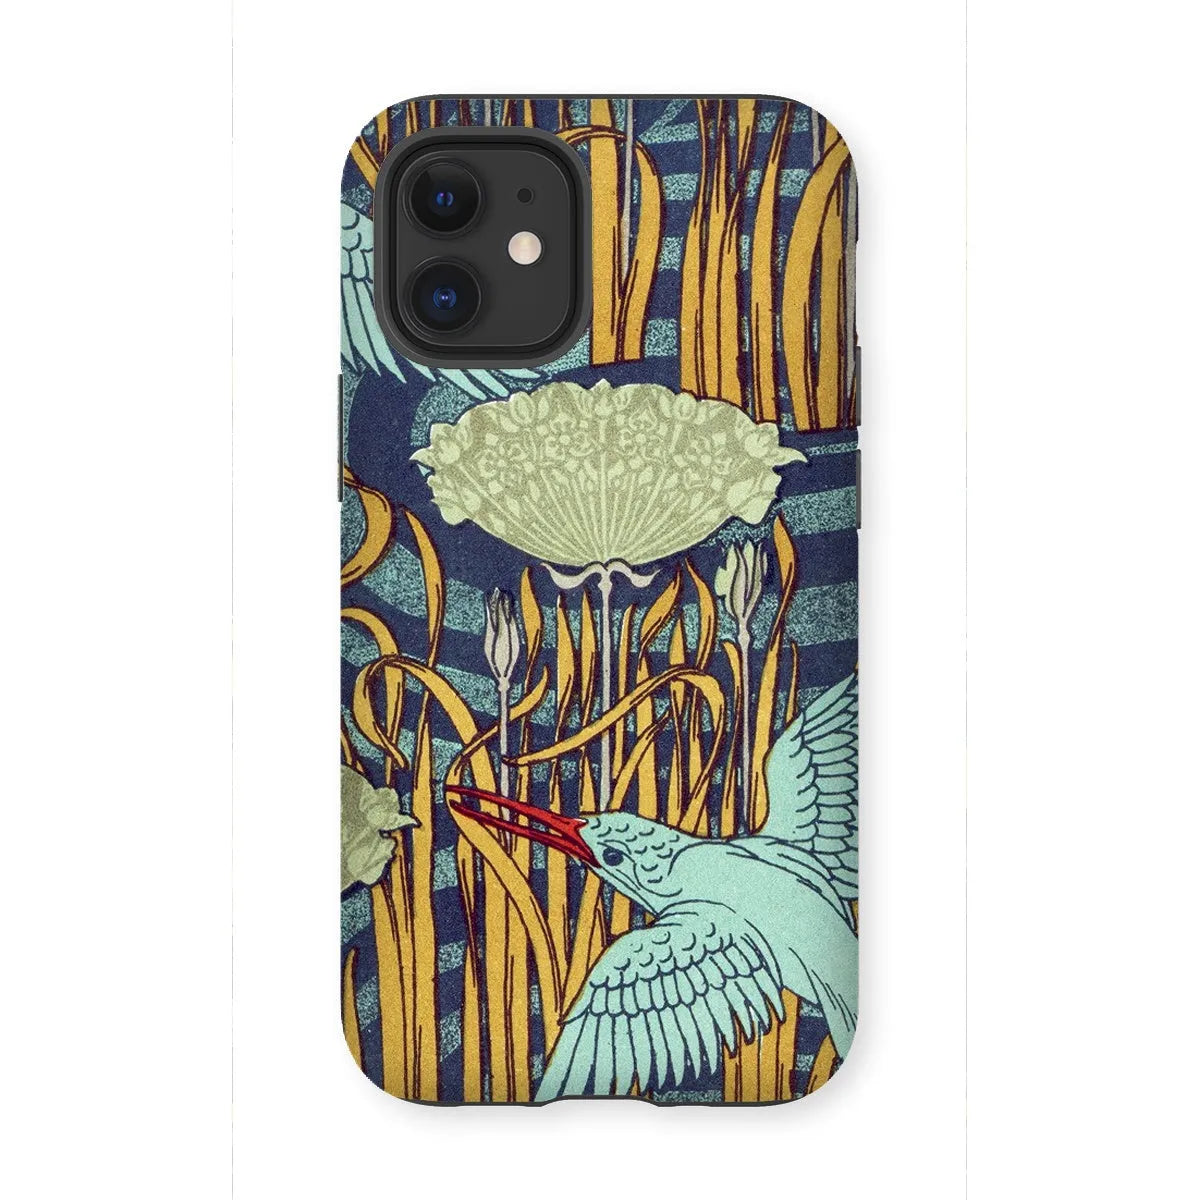 Kingfishers French Art Phone Case - Maurice Pillard Verneuil - Iphone 12 Mini / Matte - Mobile Phone Cases - Aesthetic